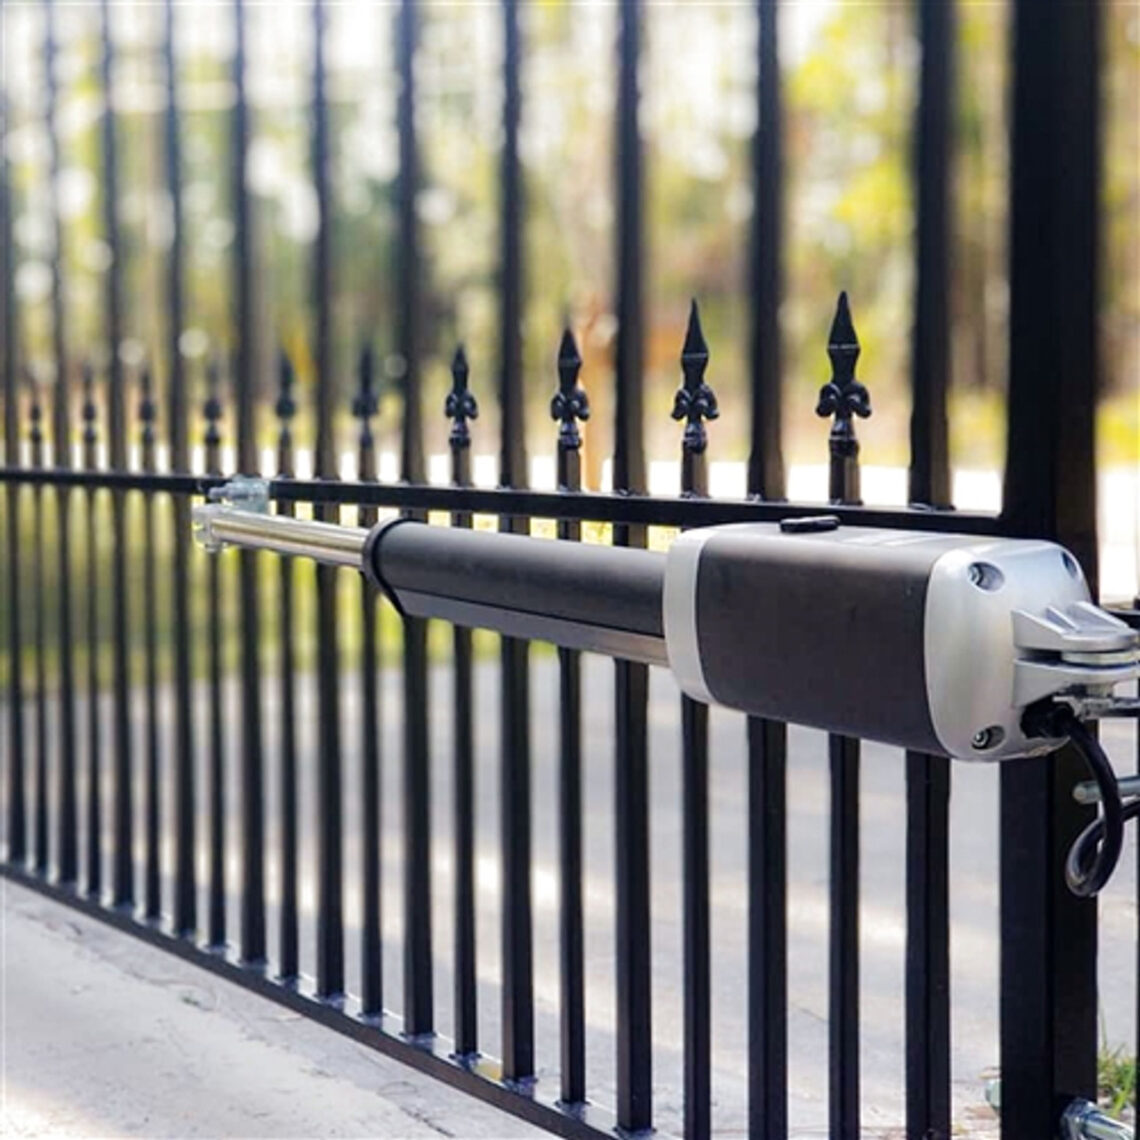 How to Install an Automatic Gate Opener: Advice From Our Experts